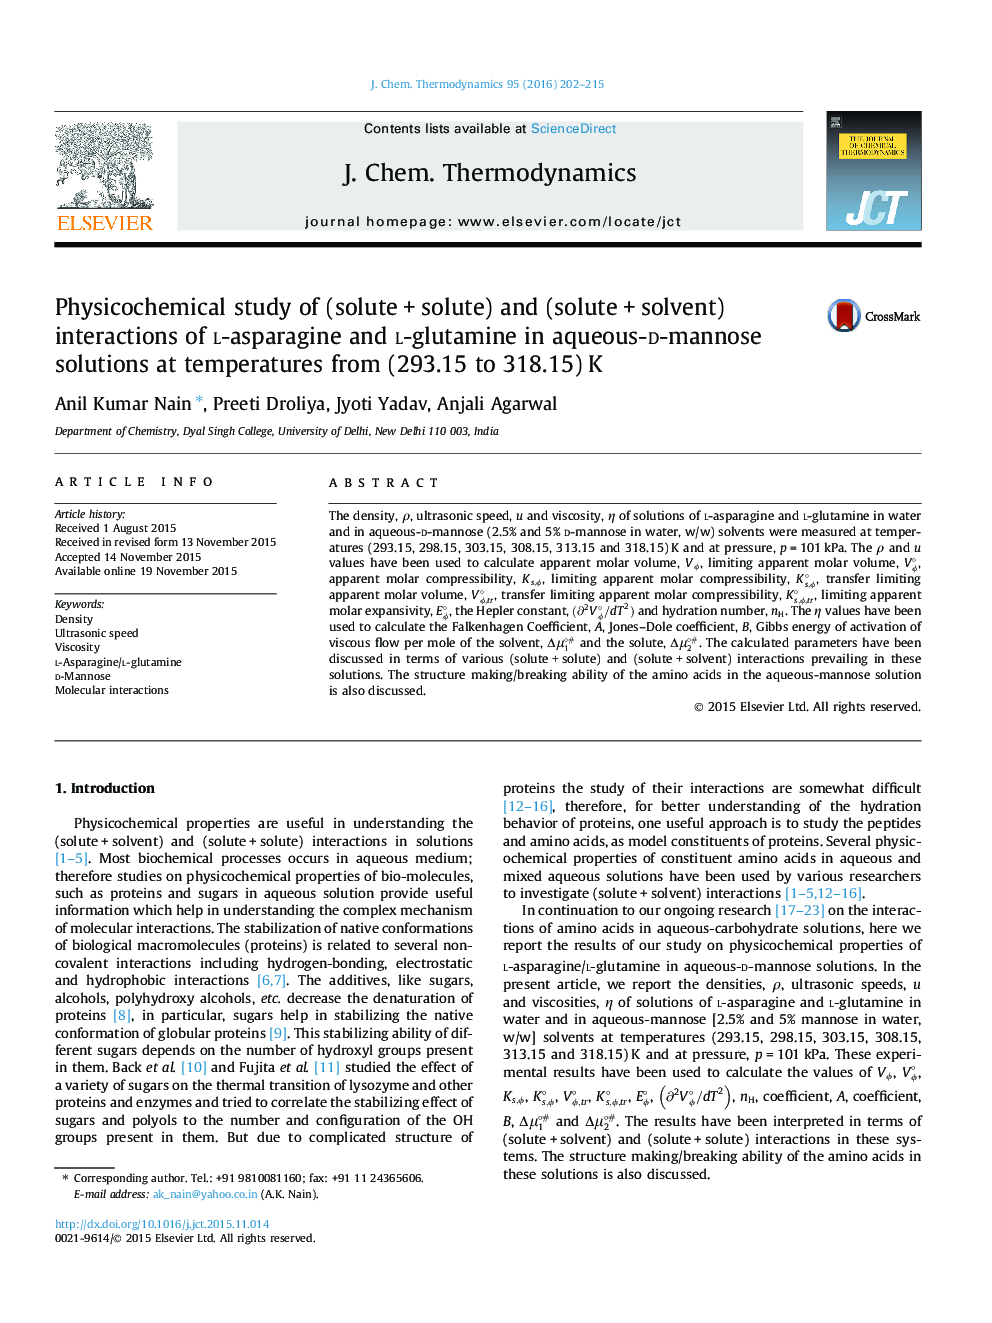 Physicochemical study of (solute + solute) and (solute + solvent) interactions of l-asparagine and l-glutamine in aqueous-d-mannose solutions at temperatures from (293.15 to 318.15) K